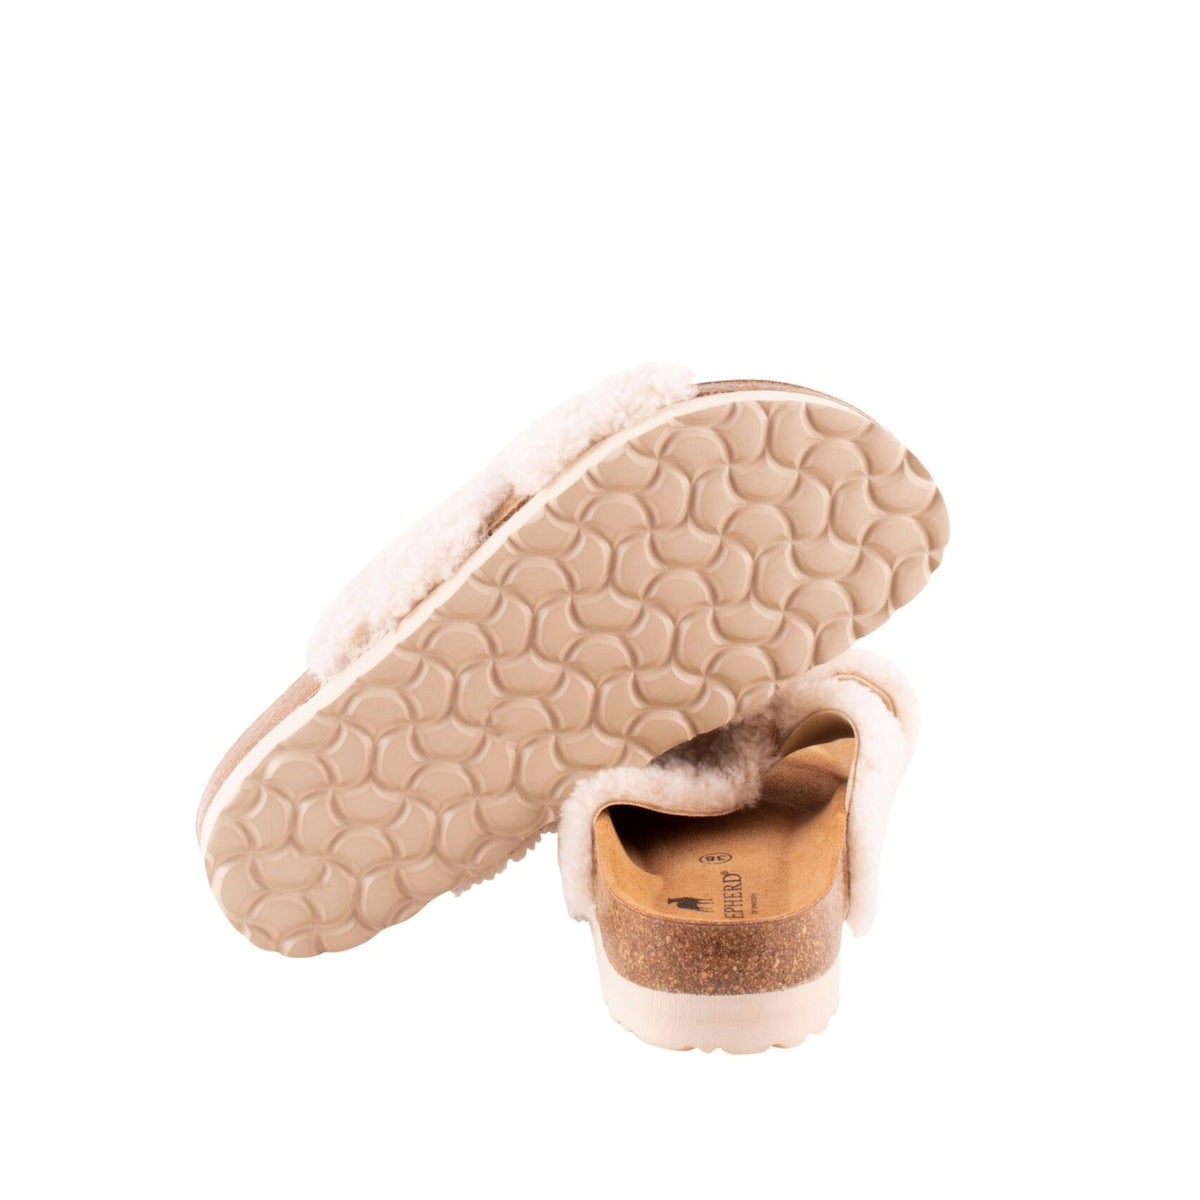 Shepherd of Sweden Elsa Sandals Sheepskin Cream new on sale at our independent fashion store